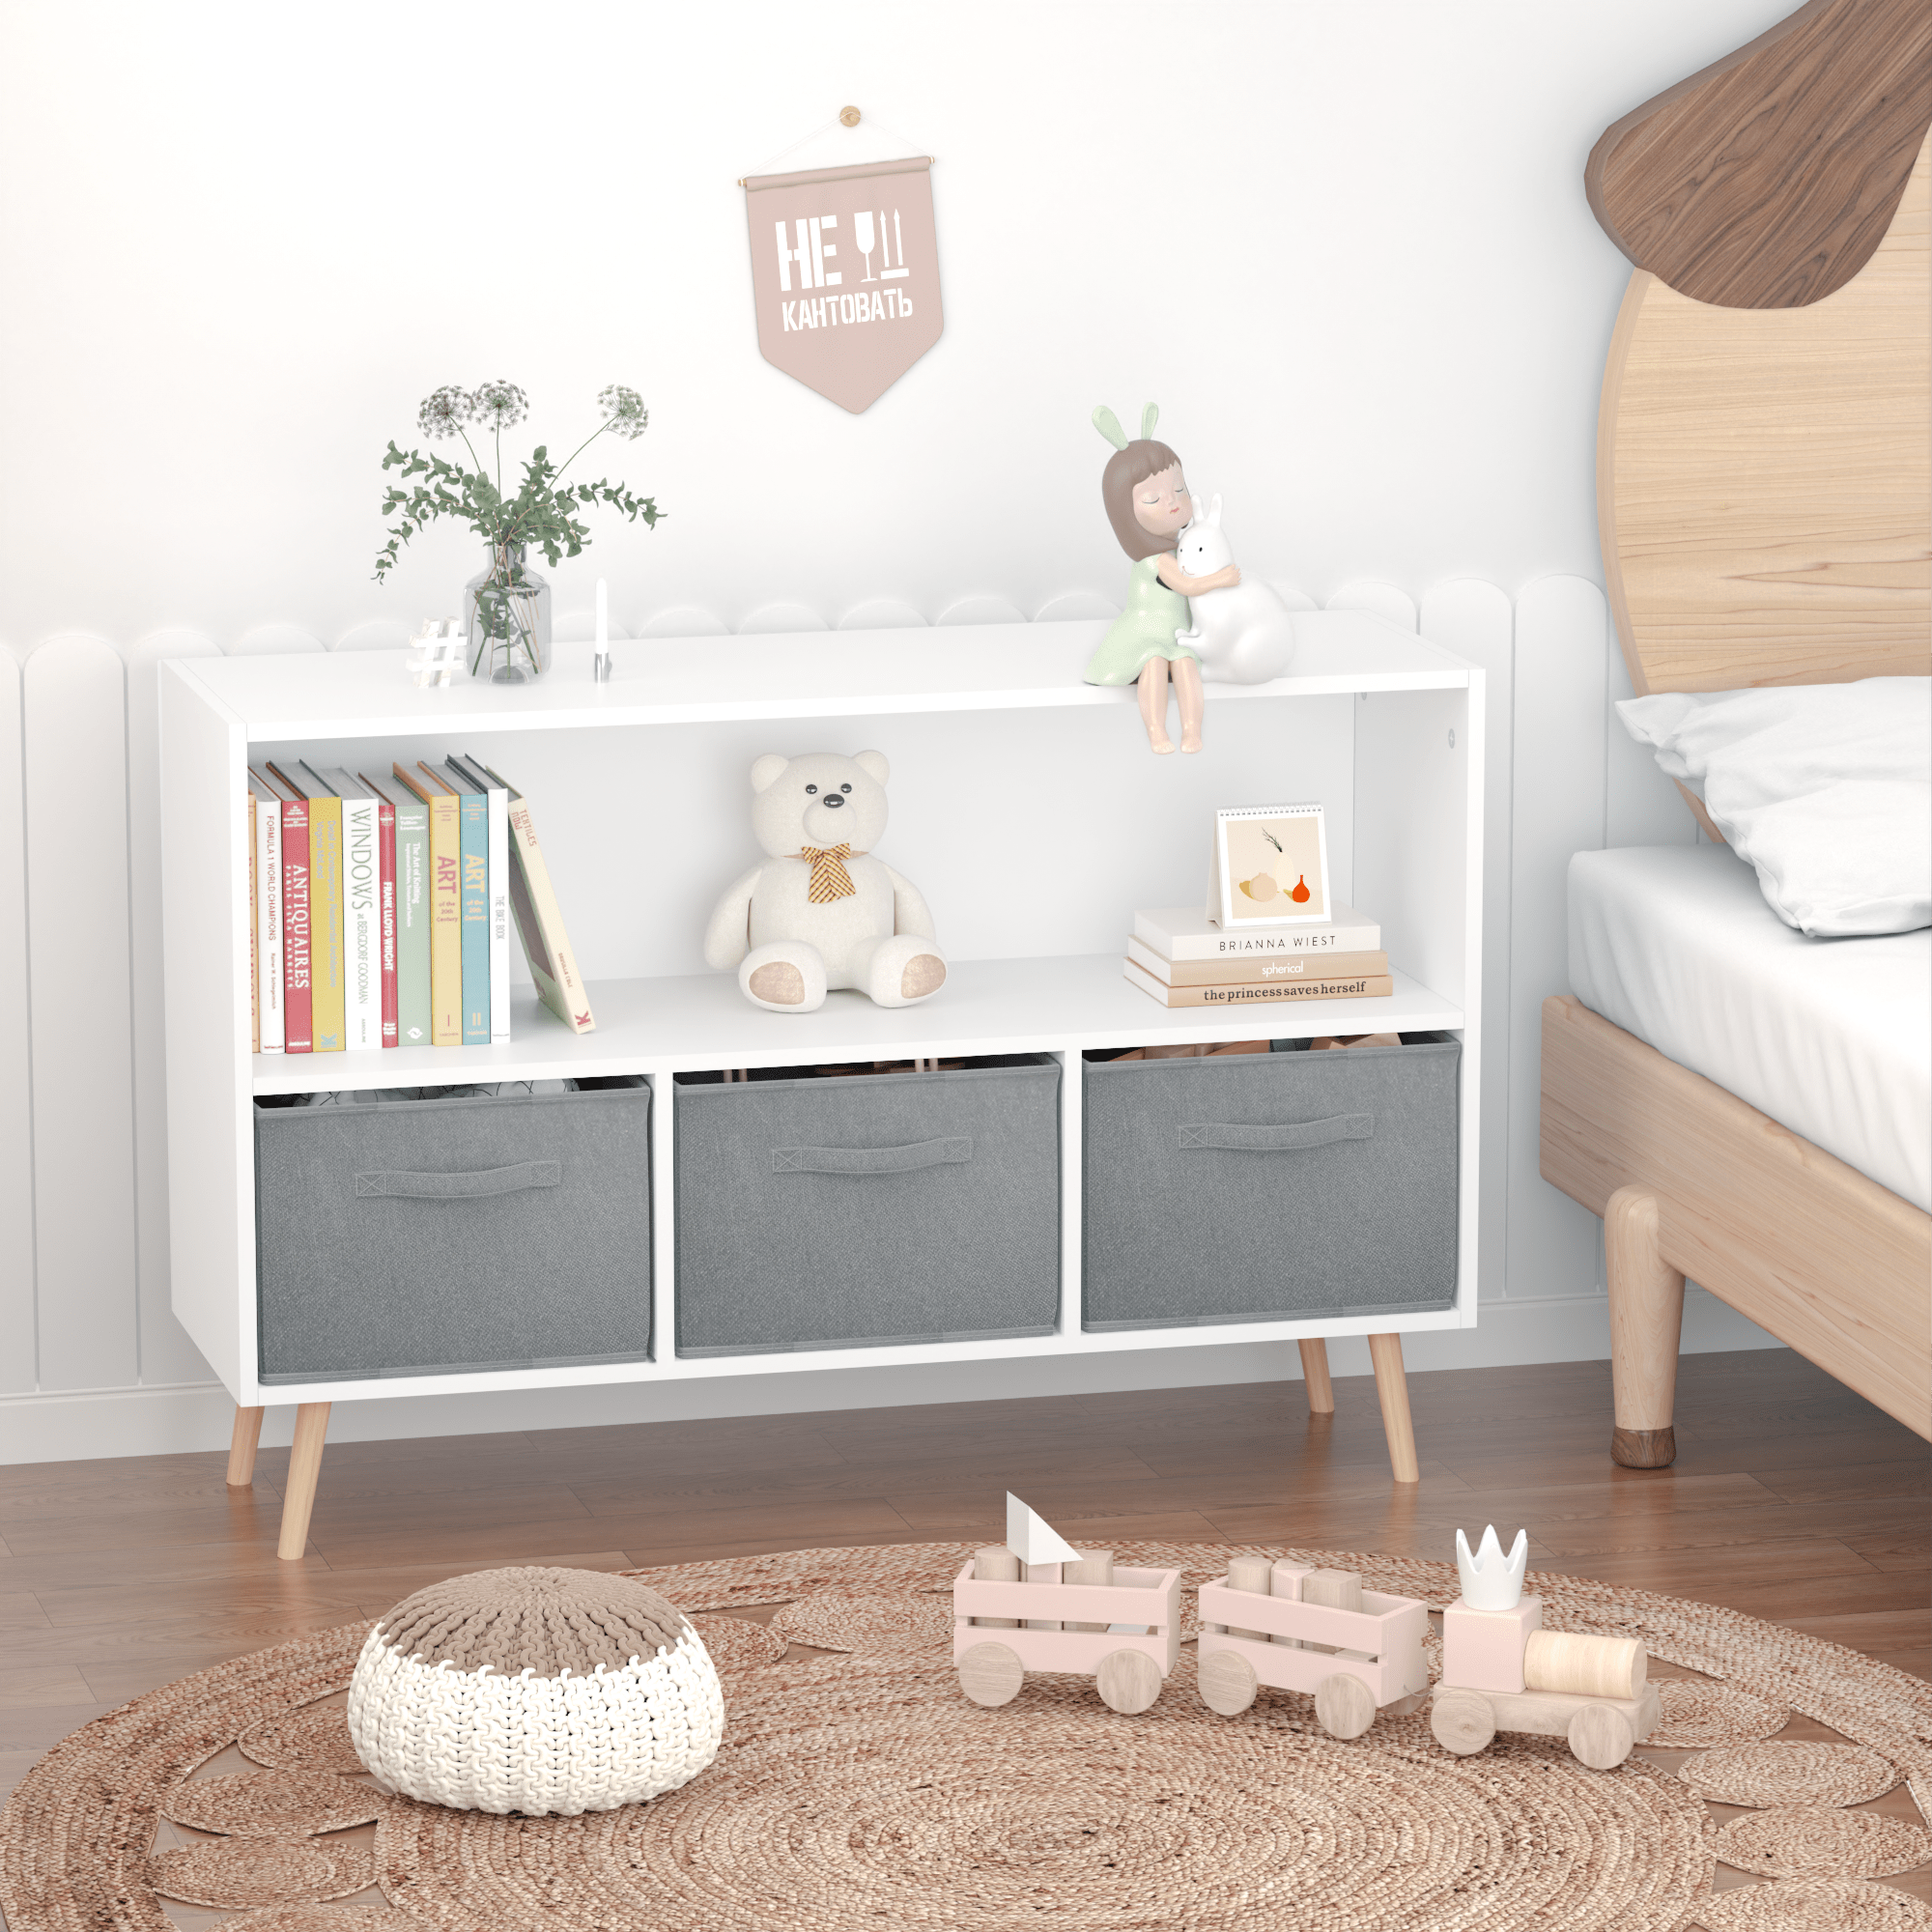 Kids bookcase with Collapsible Fabric Drawers, Children's Book Display, Toy Storage Cabinet Organizer, White/Gray